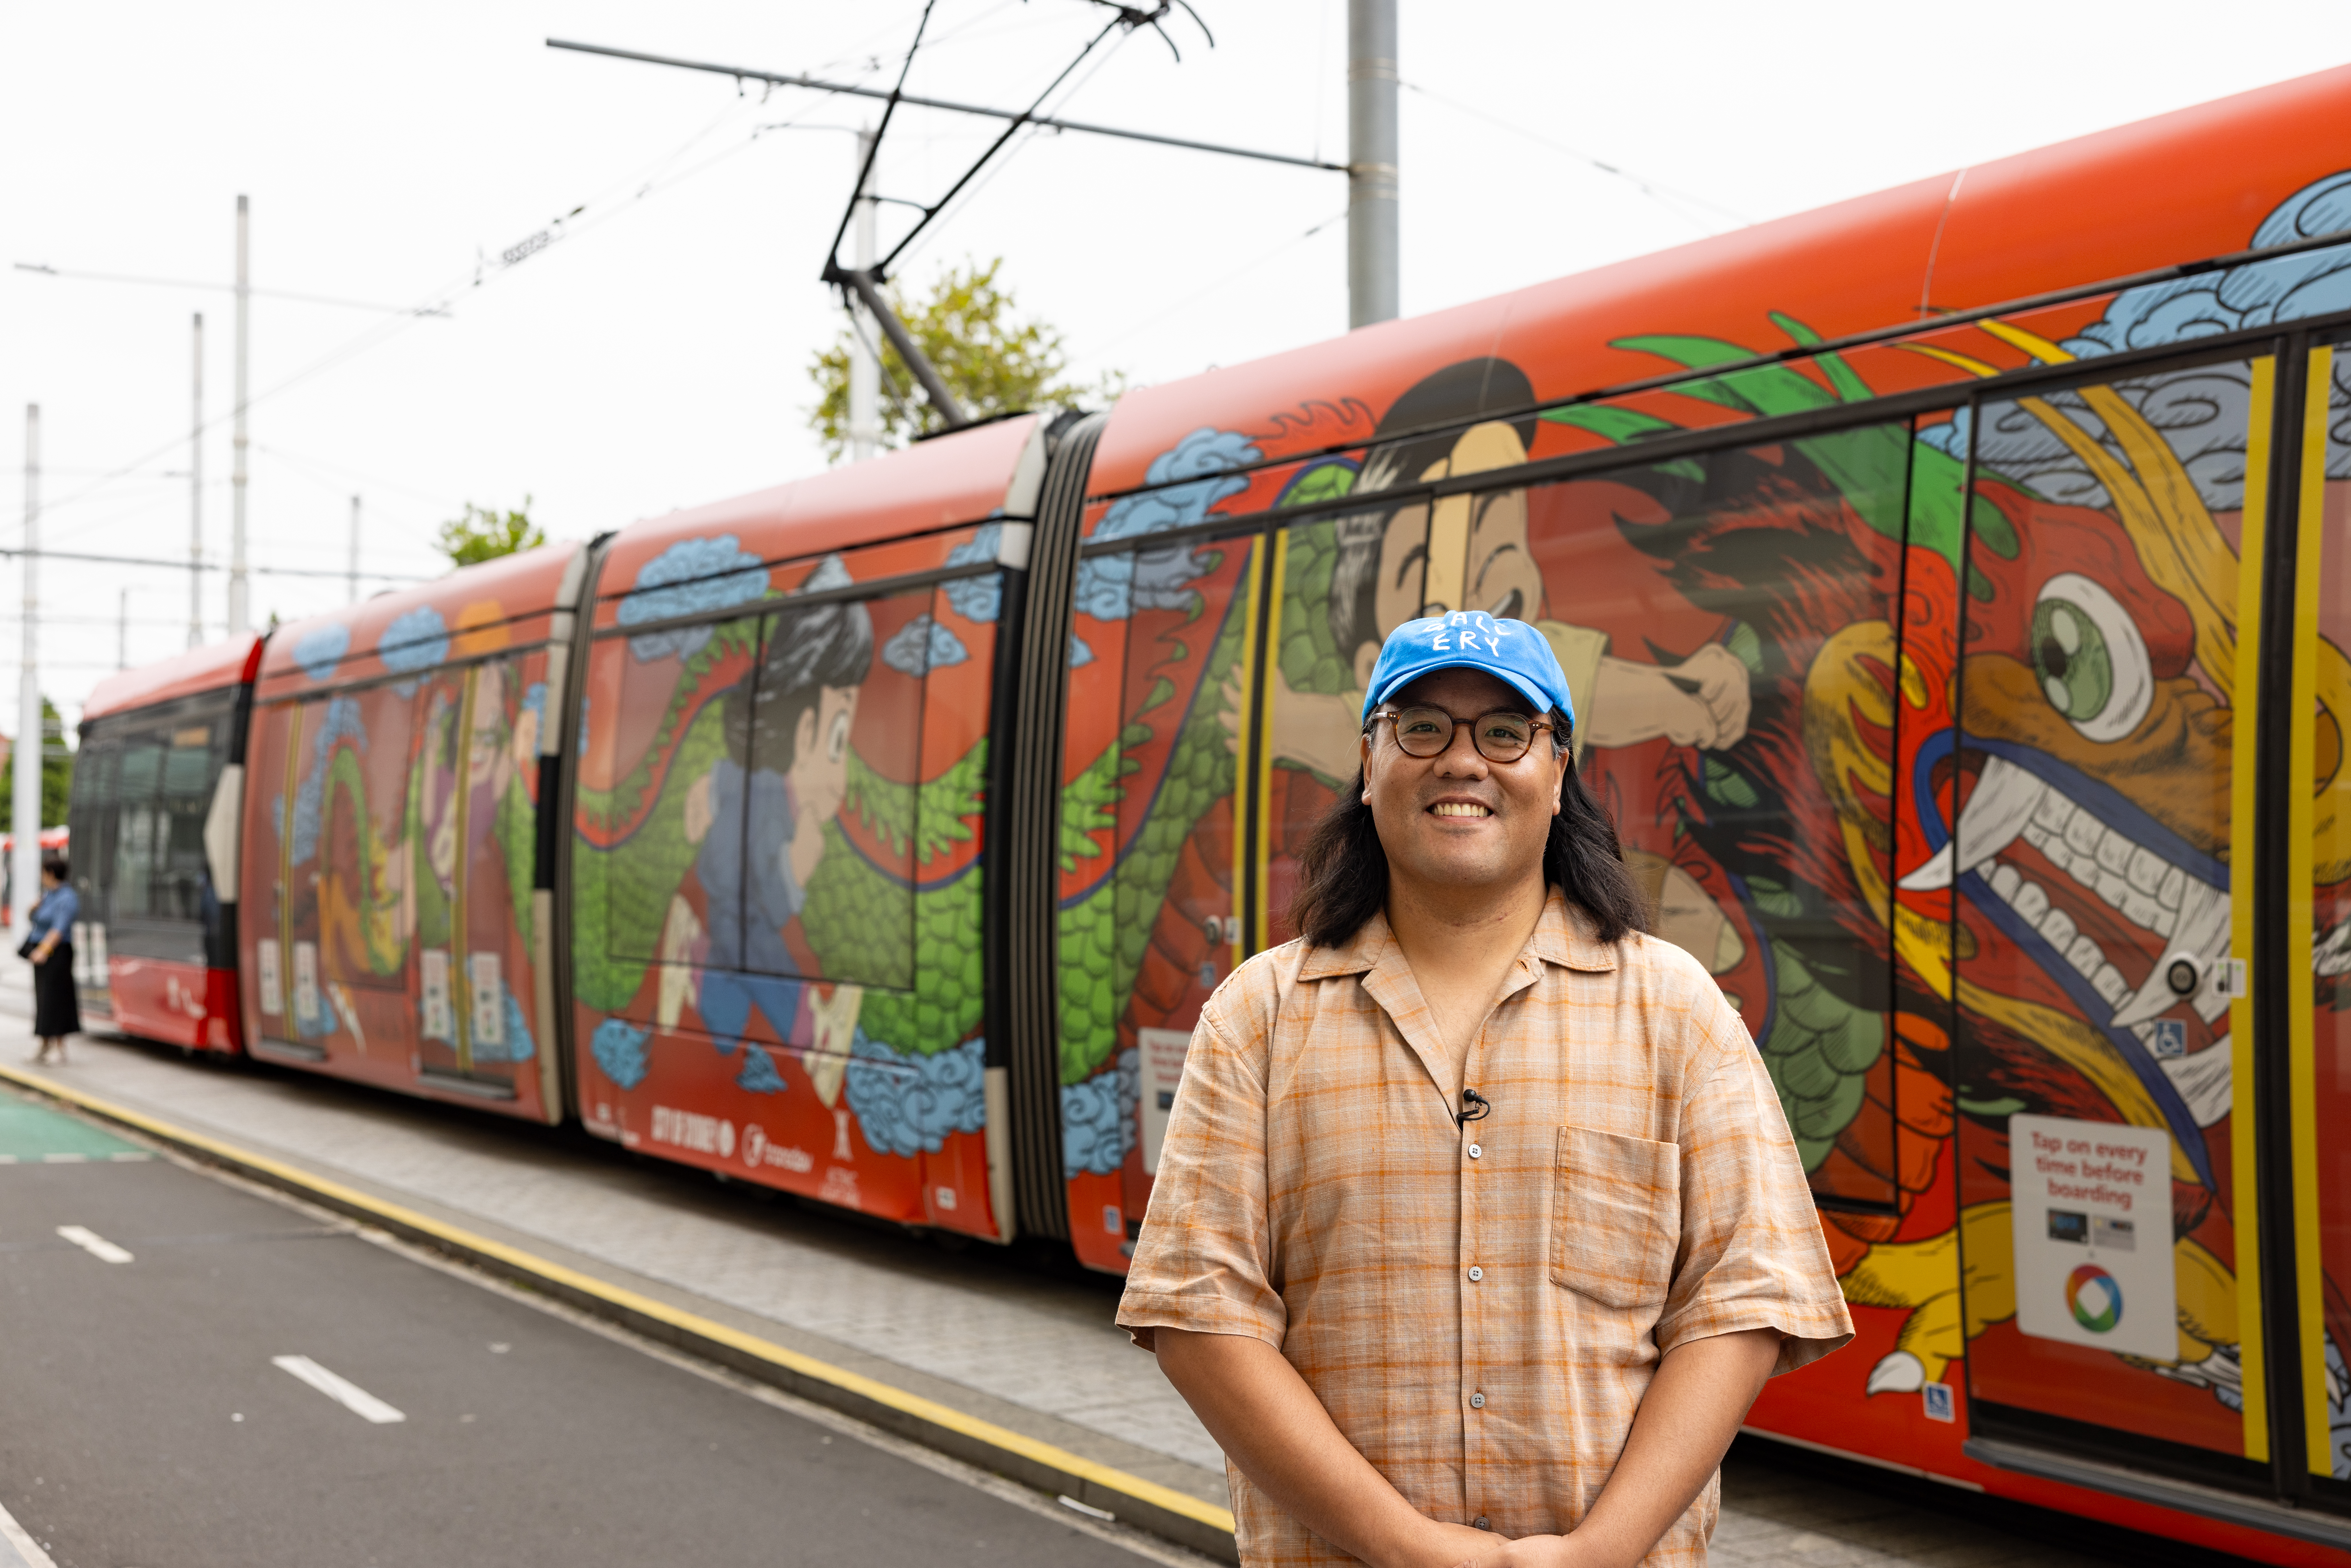 Artist Andrew Yee with his creation at Central Chalmers tram stop. Image: City of Sydney/Chris Southwood